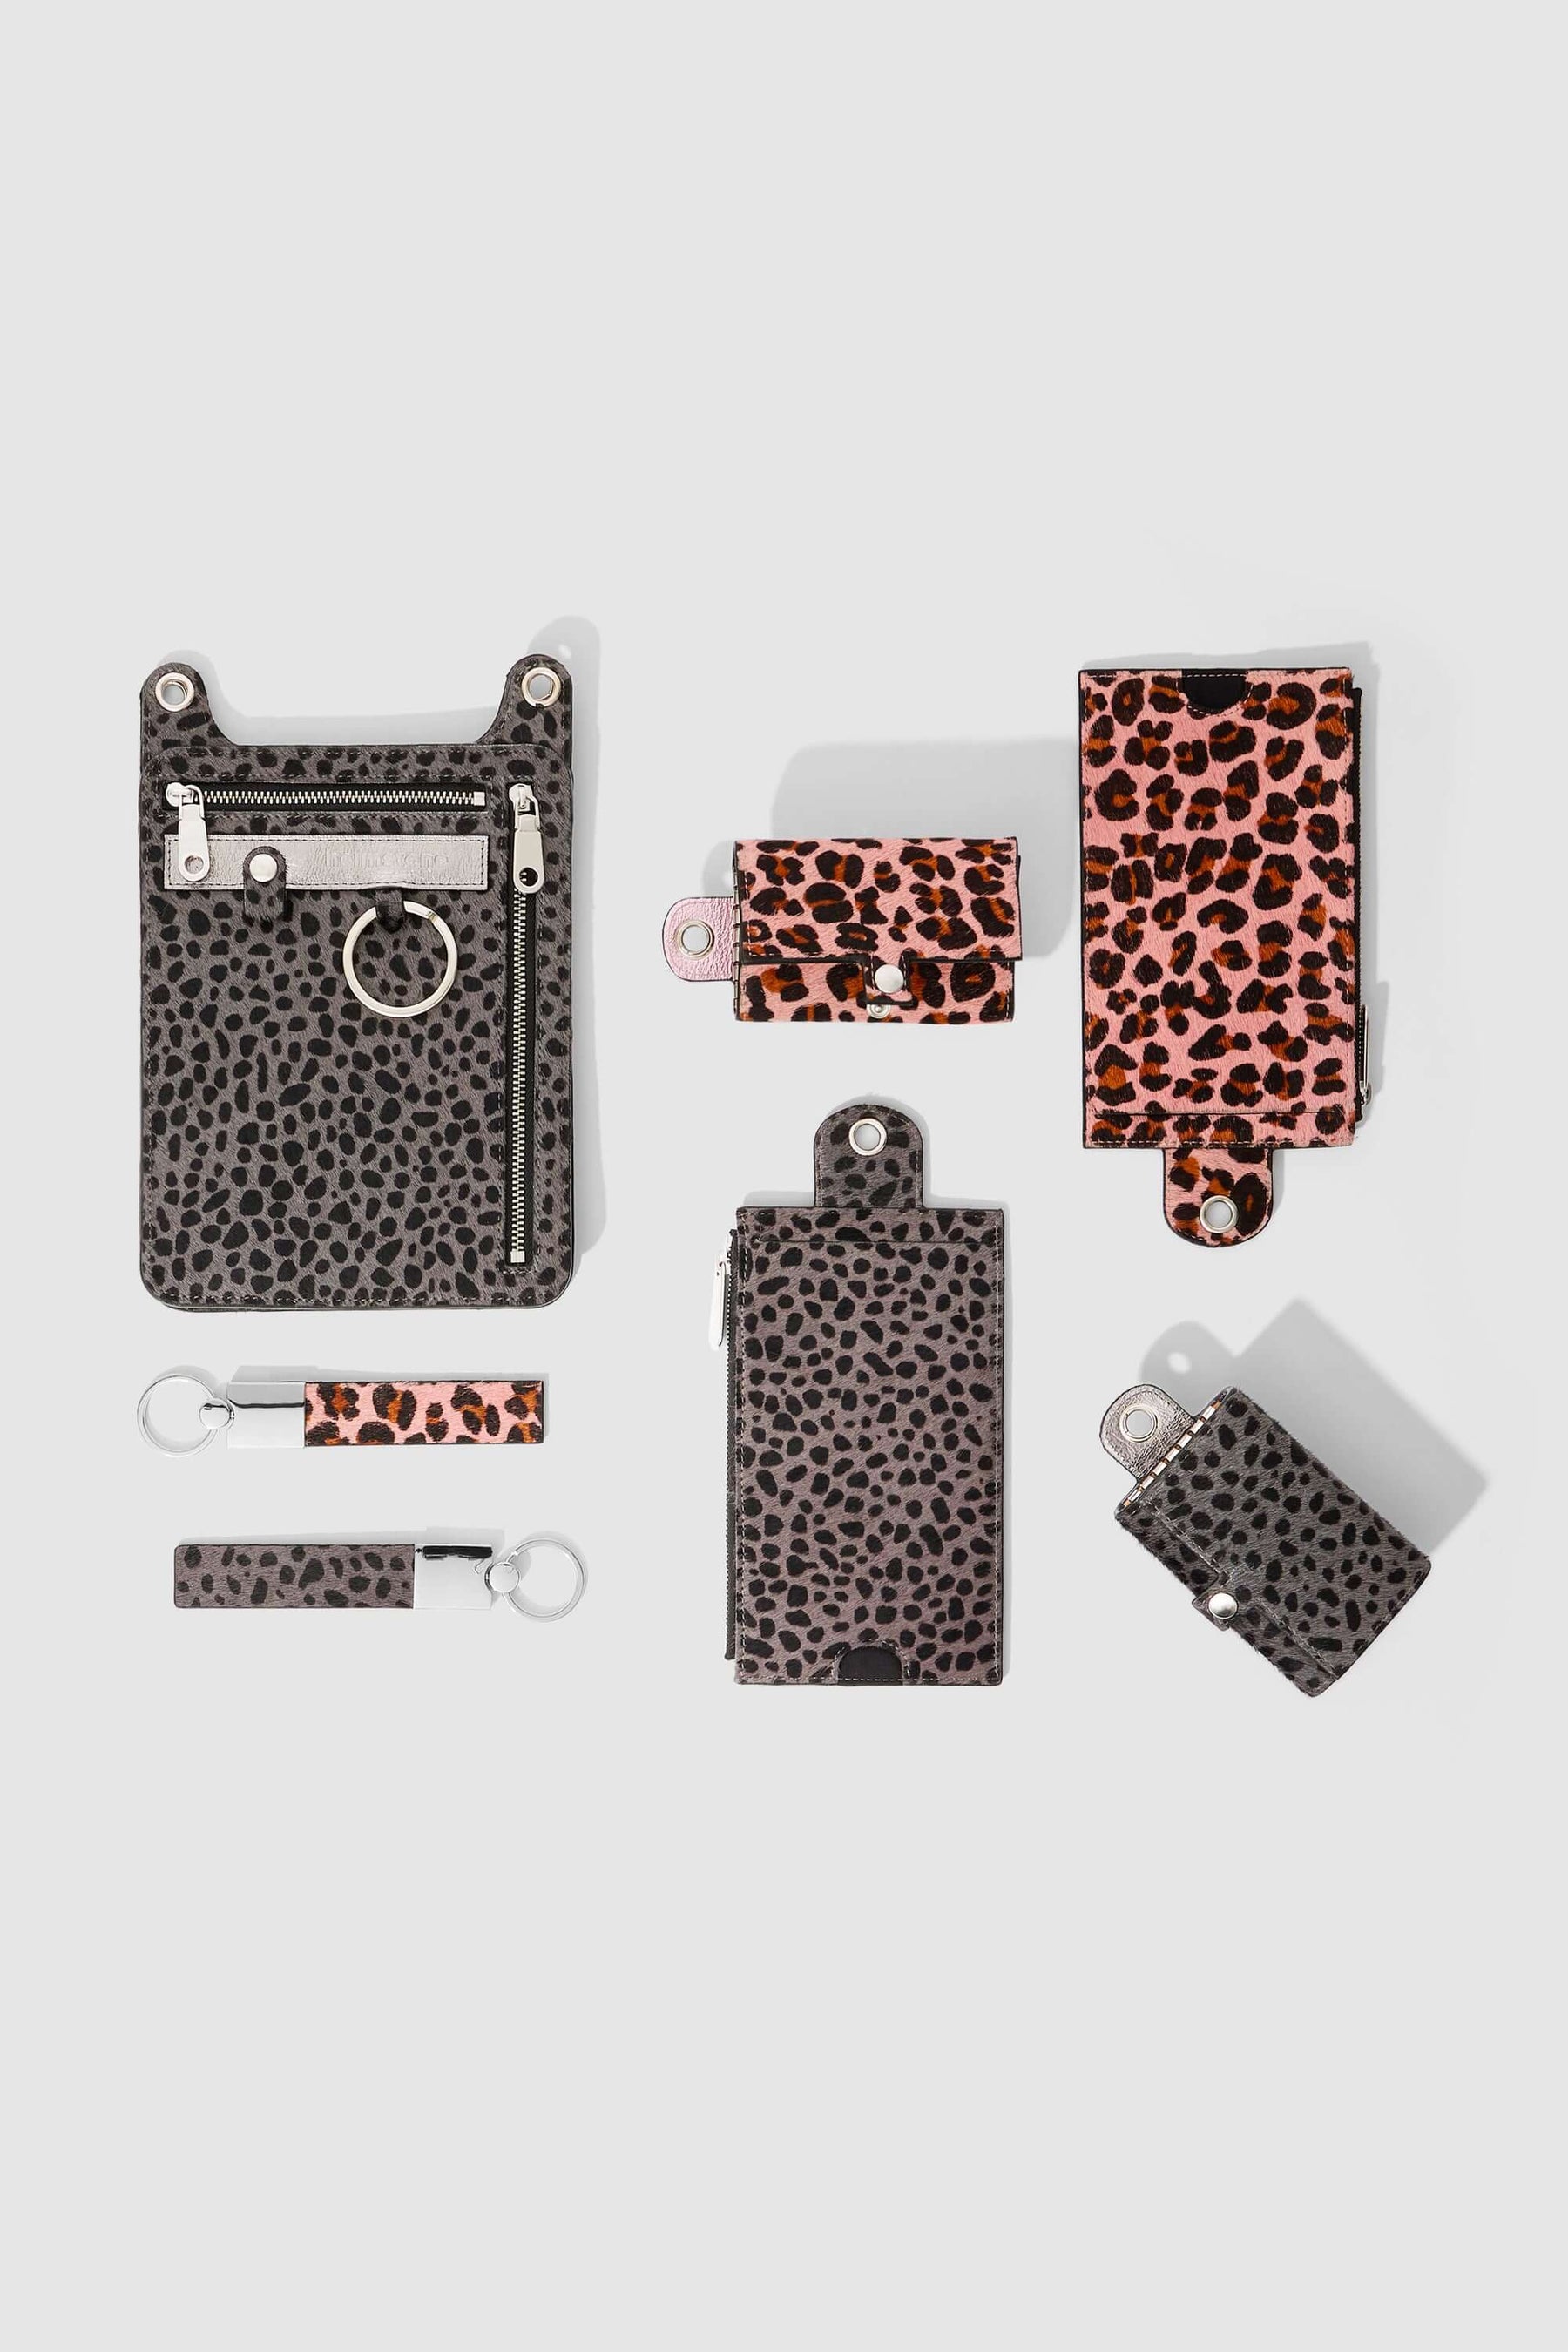 The Minis - 6 key holder in pink Leopard printed leather